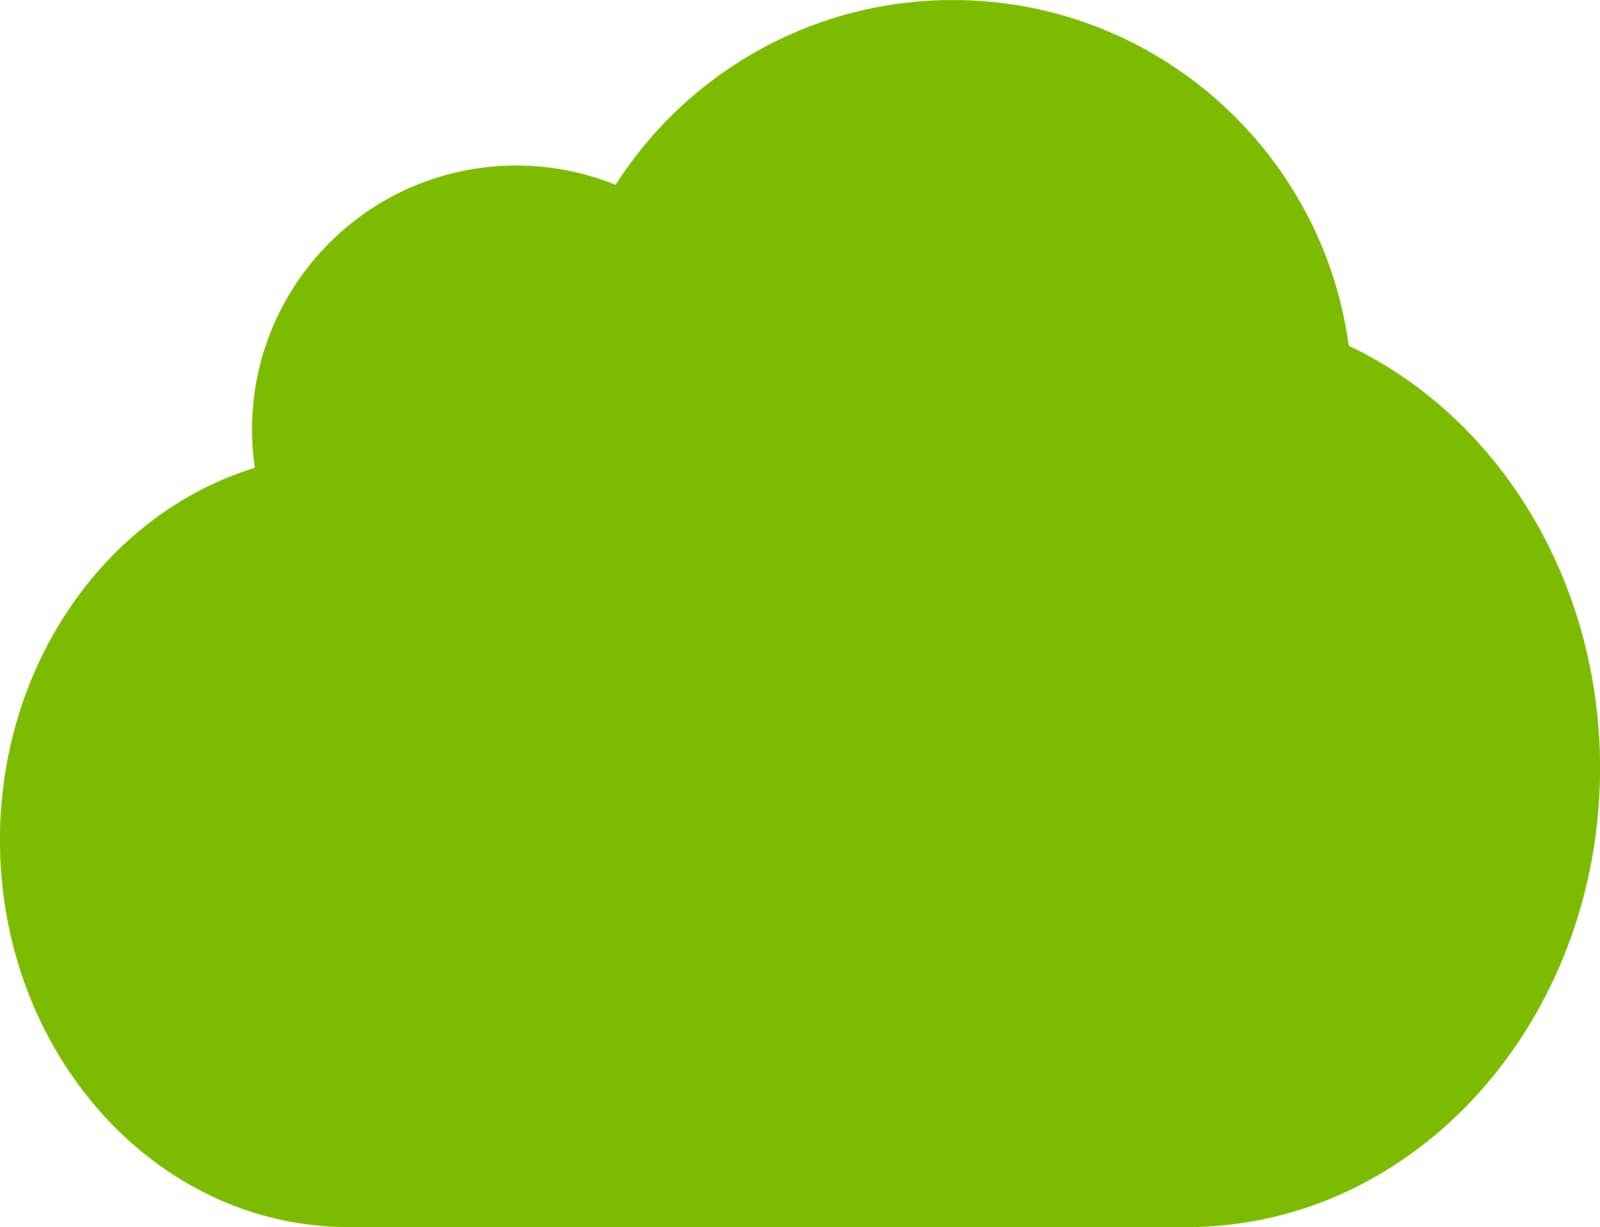 Cloud icon from Primitive Set. This isolated flat symbol is drawn with eco green color on a white background, angles are rounded.